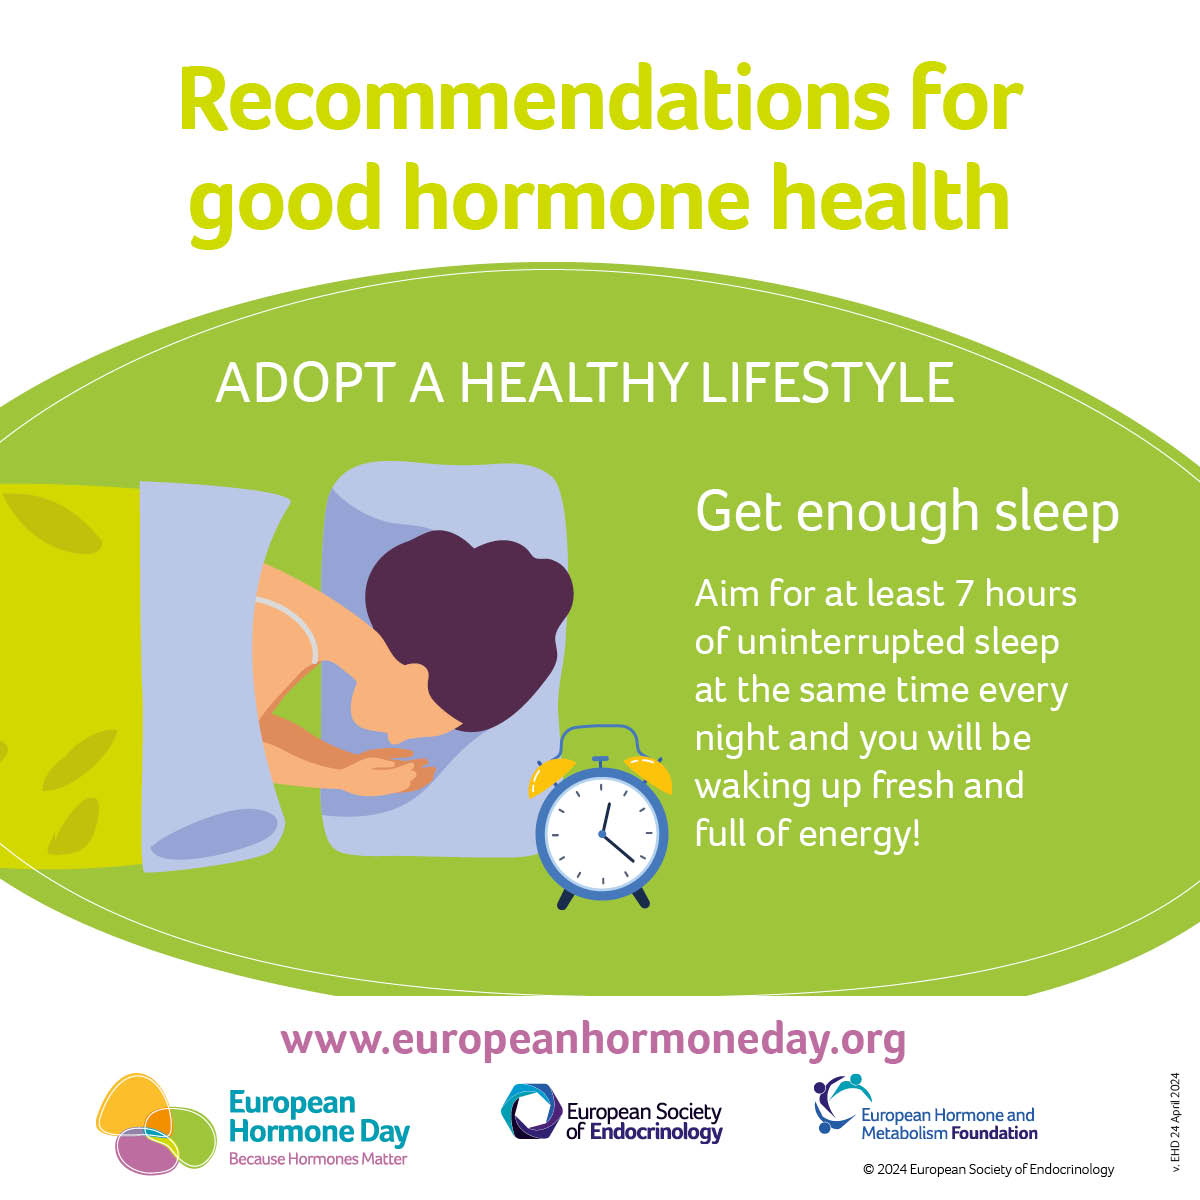 Sleep is a really important part of endocrine health! One of the 10 recommendations for good hormone health is prioritising sleep, you can find out more about sleep, circadian rhythms and hormones online: ow.ly/95TY50Rn05O #BecauseHormonesMatter #InsideHormones